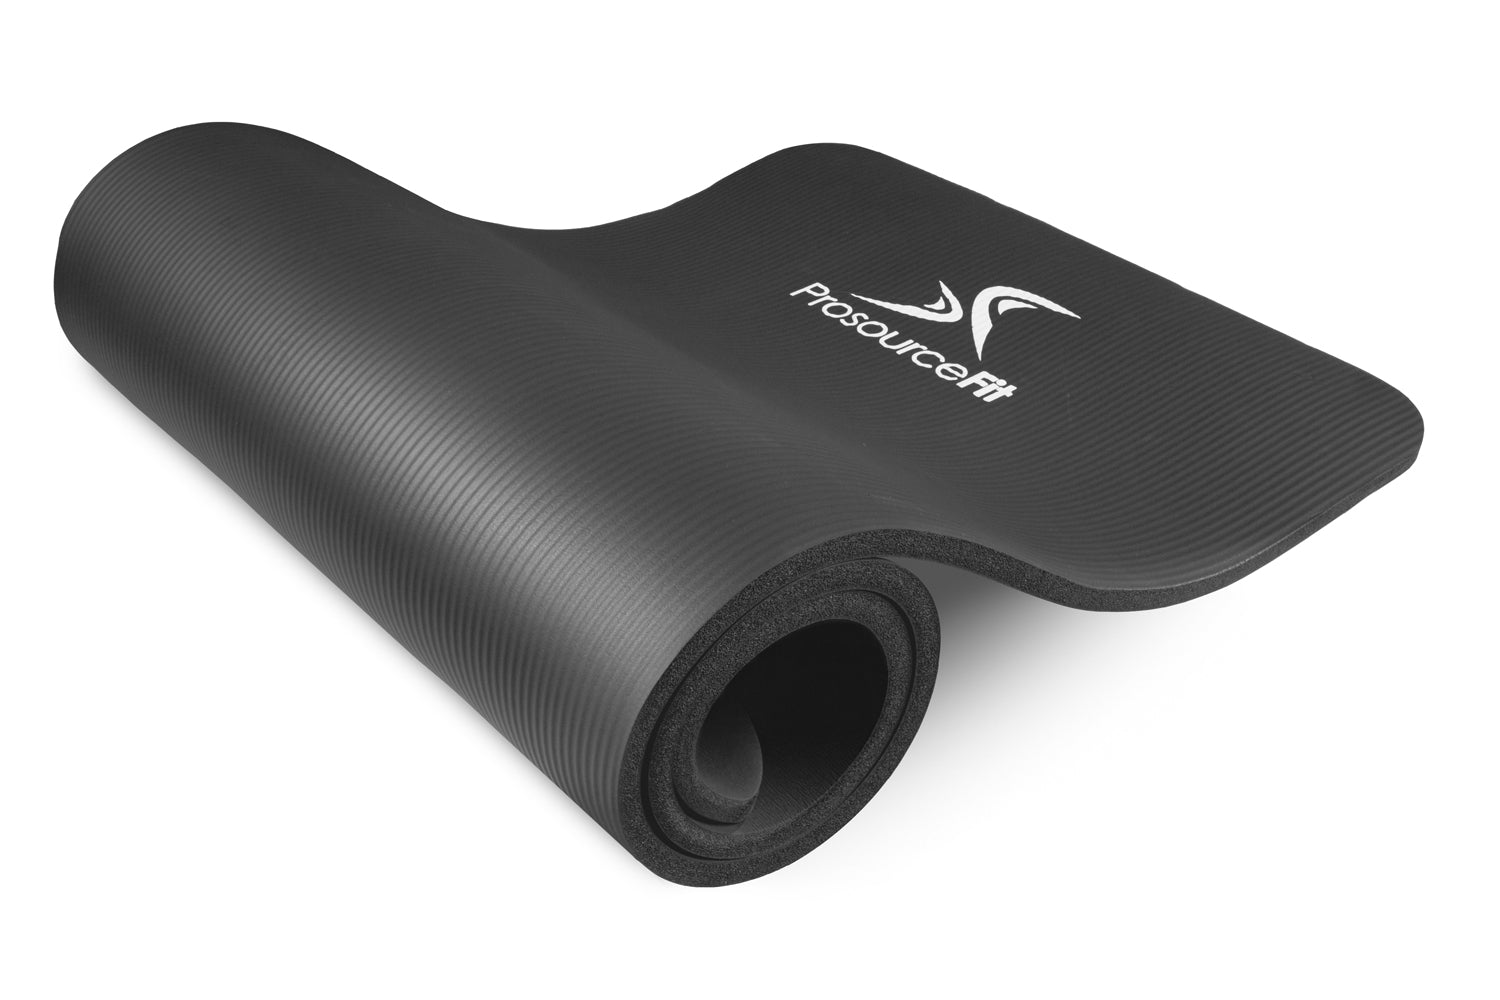 Extra Thick Yoga and Pilates Mat 1/2 inch Black - ProsourceFit